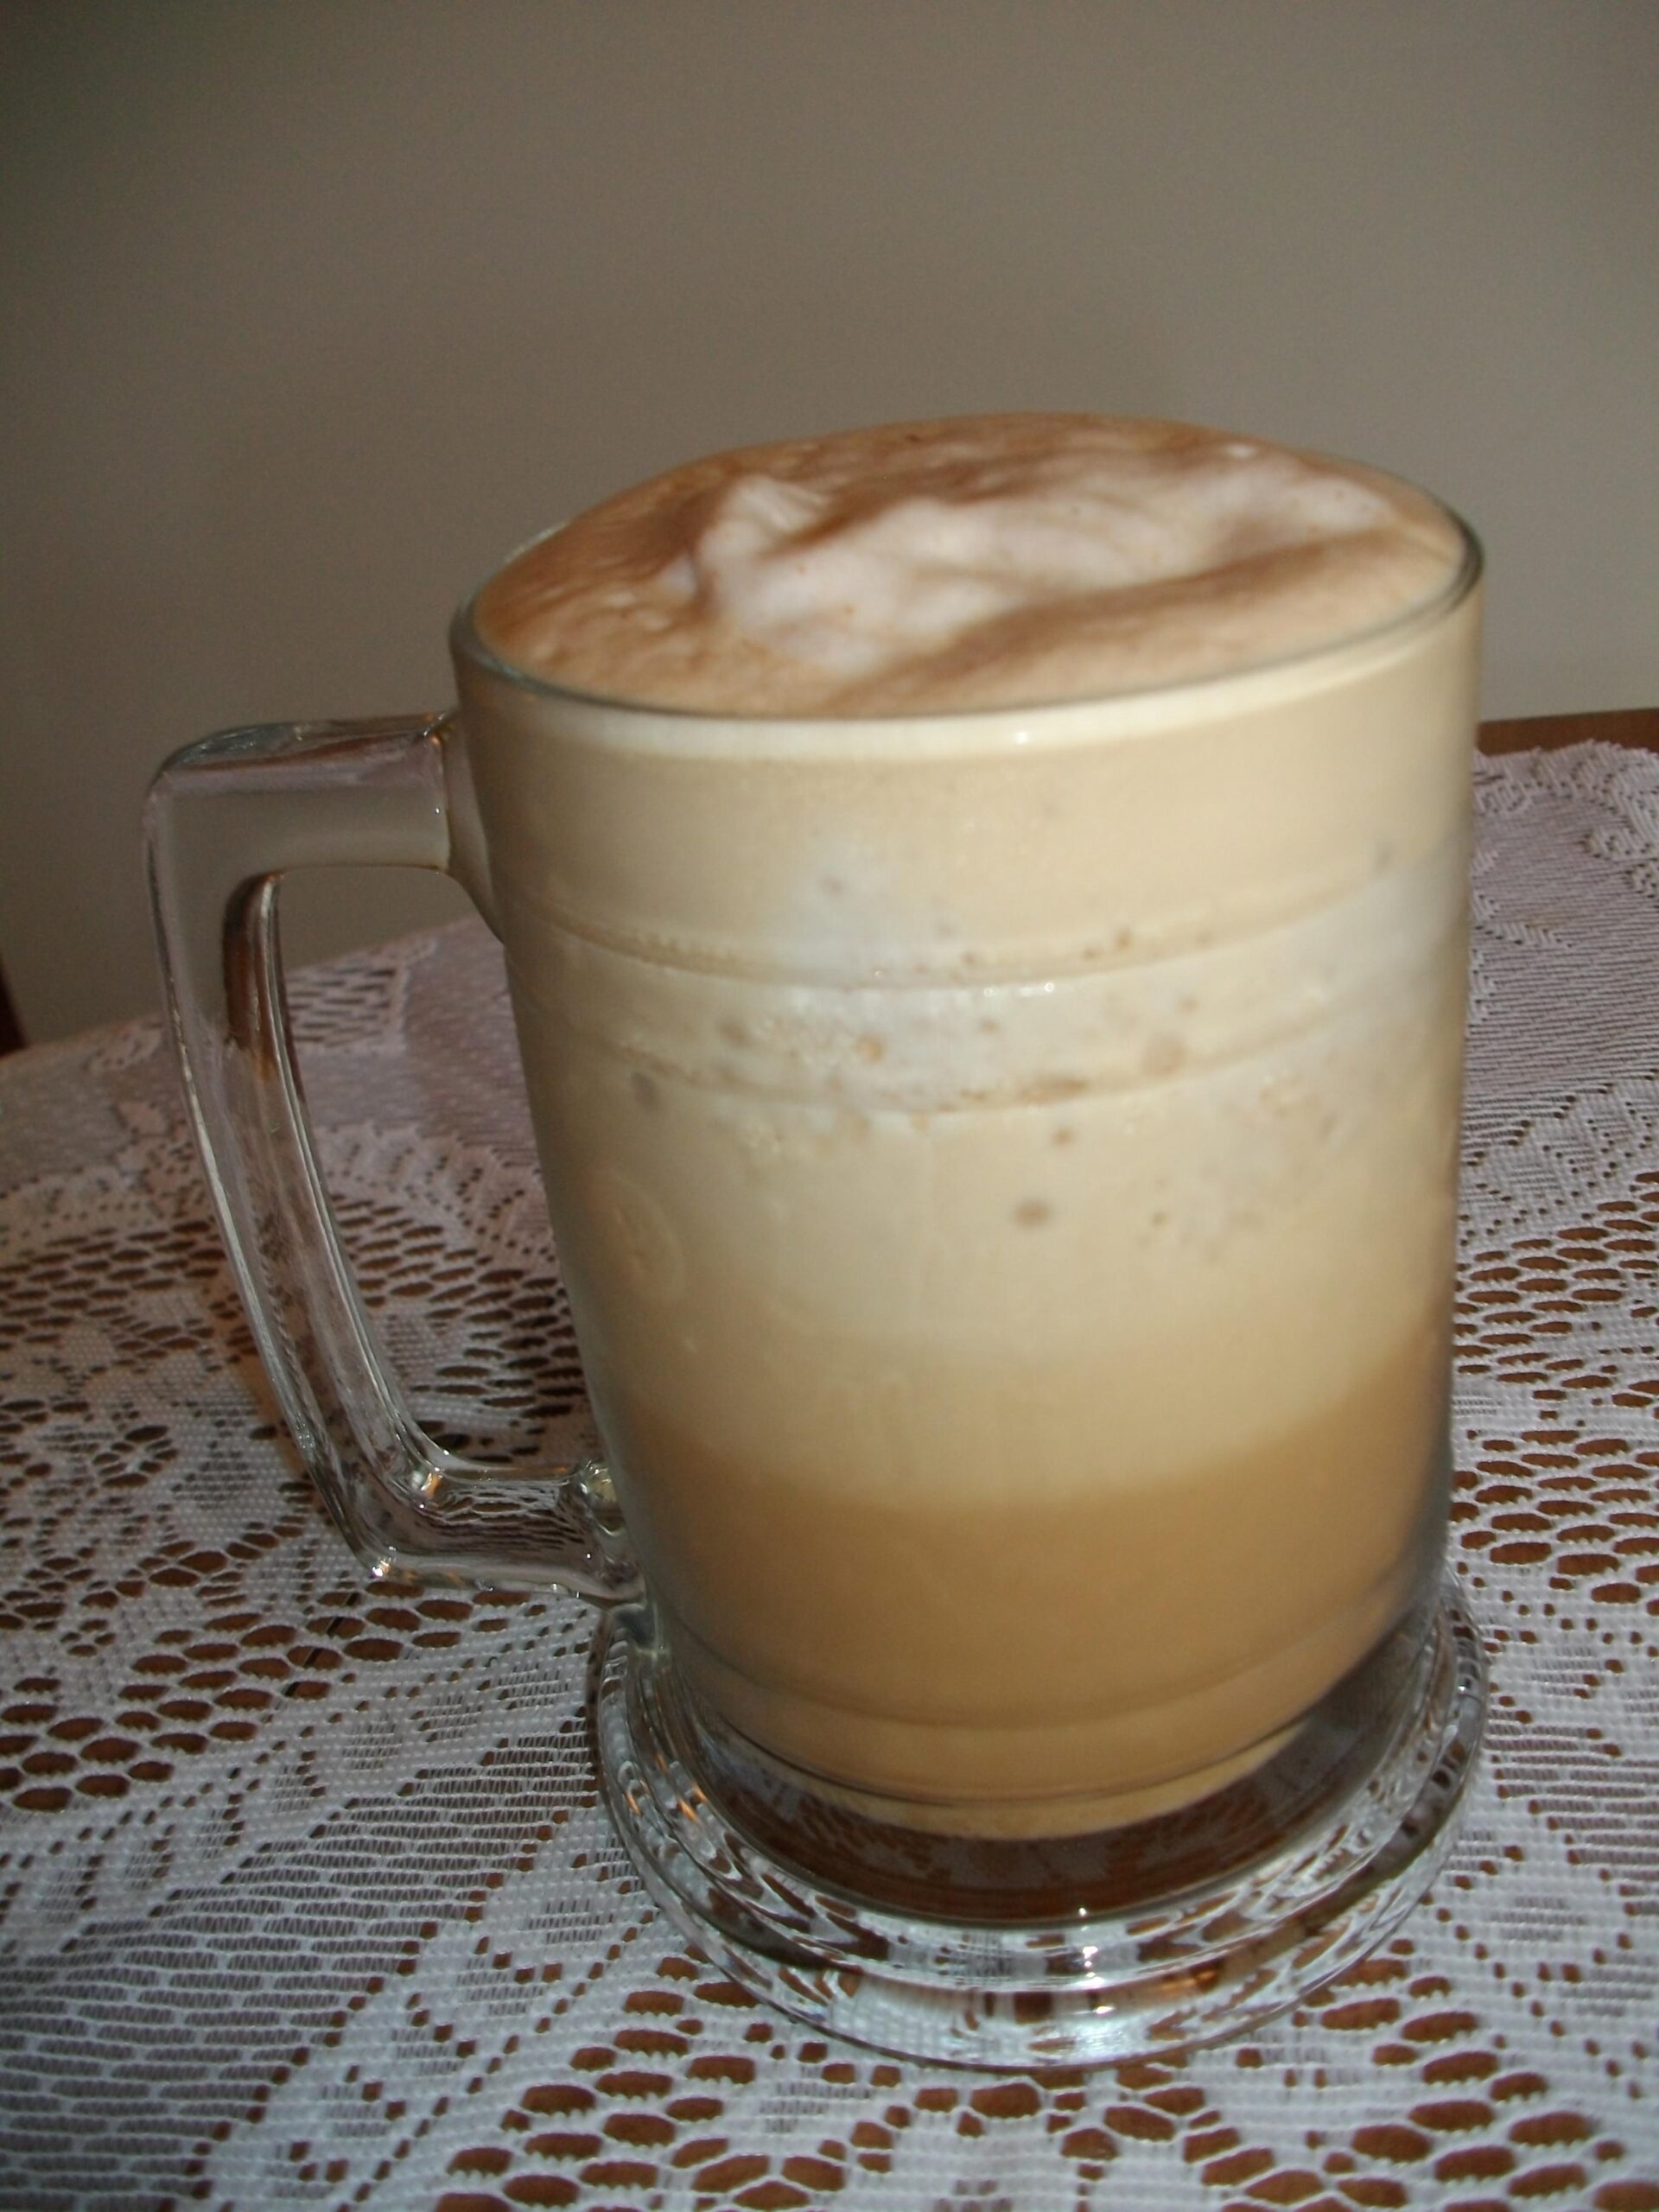  A frothy delight perfect for coffee lovers.